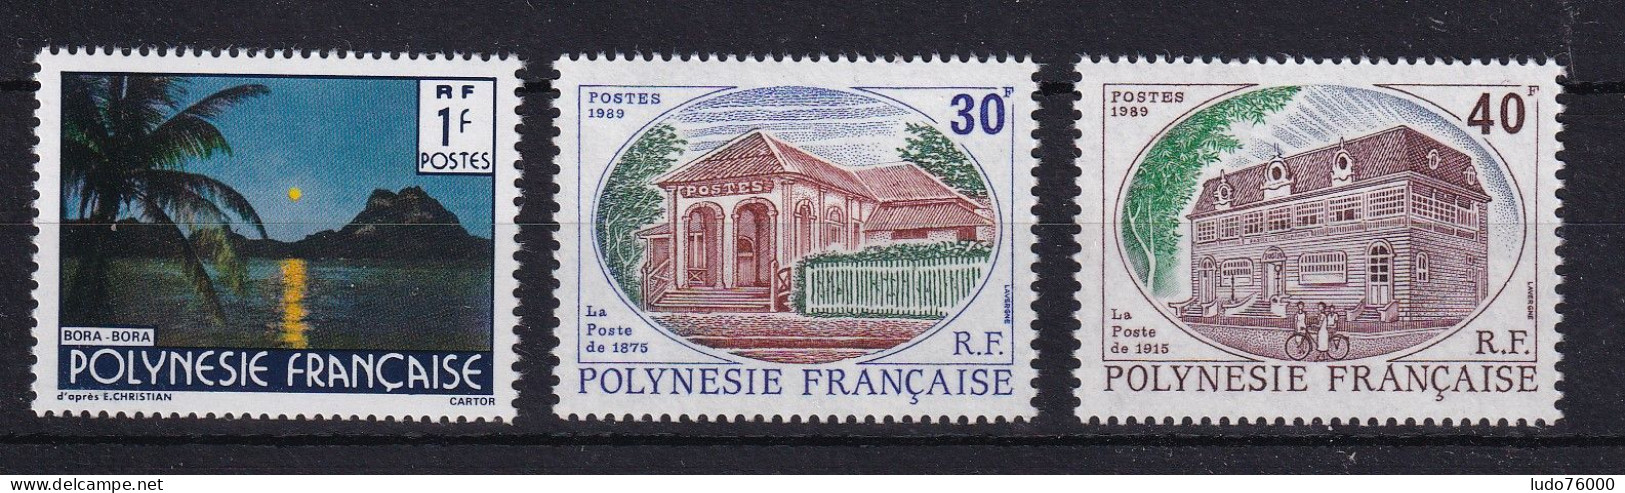 D 740 / POLYNESIE / N° 321/323 NEUF** COTE 3.30€ - Collections, Lots & Séries